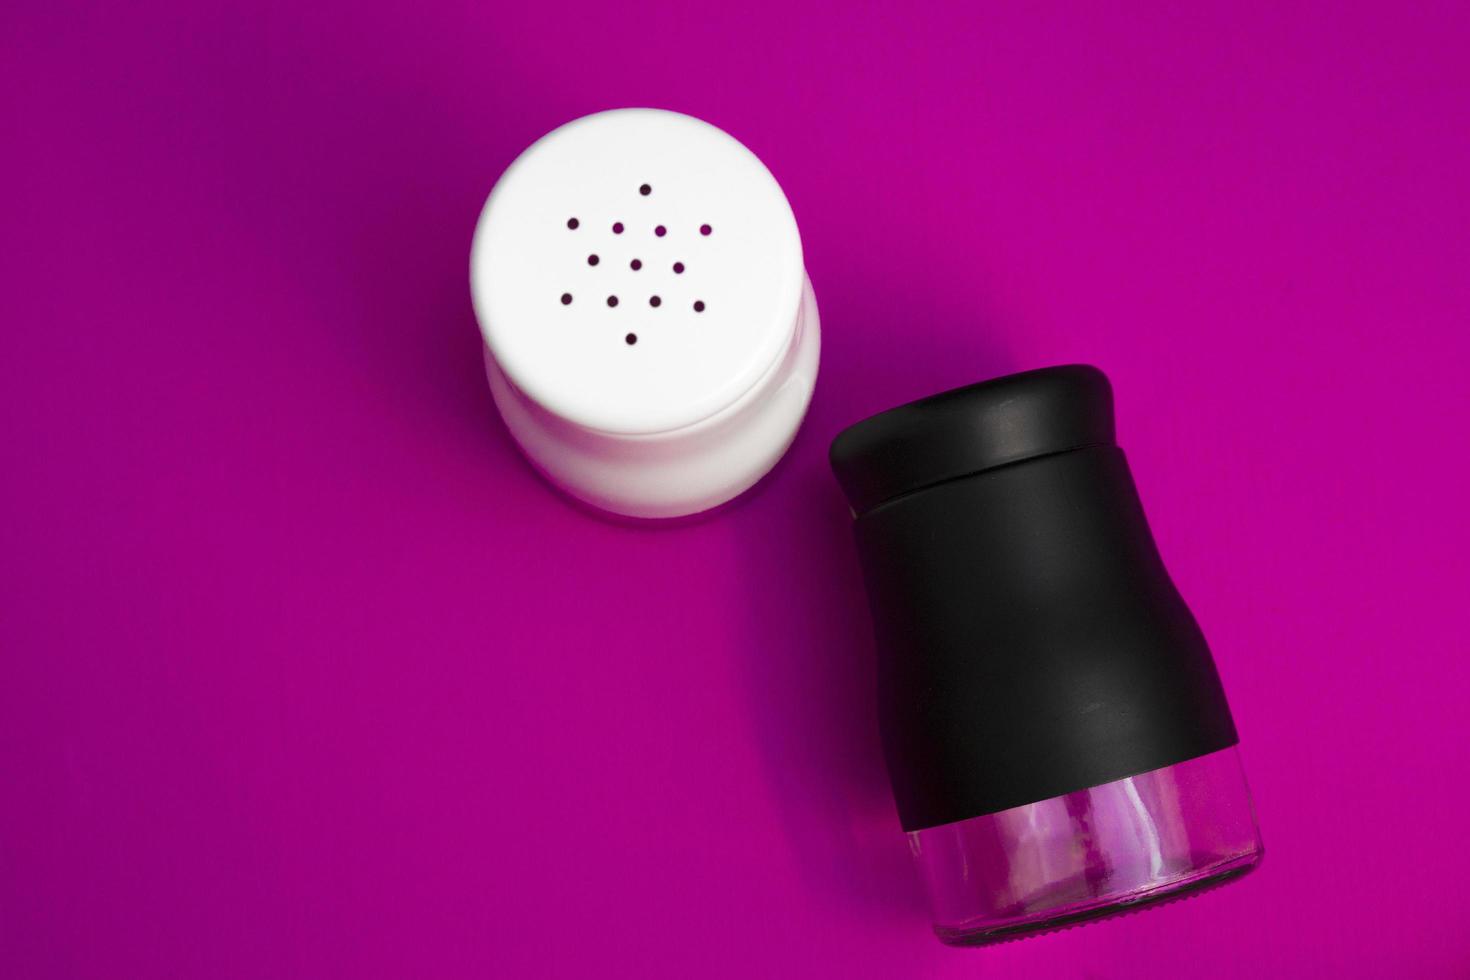 salt or pepper shaker in oblique and stand up from top view. seasoning powder container in white and black. food condiment shaker on pink background. photo